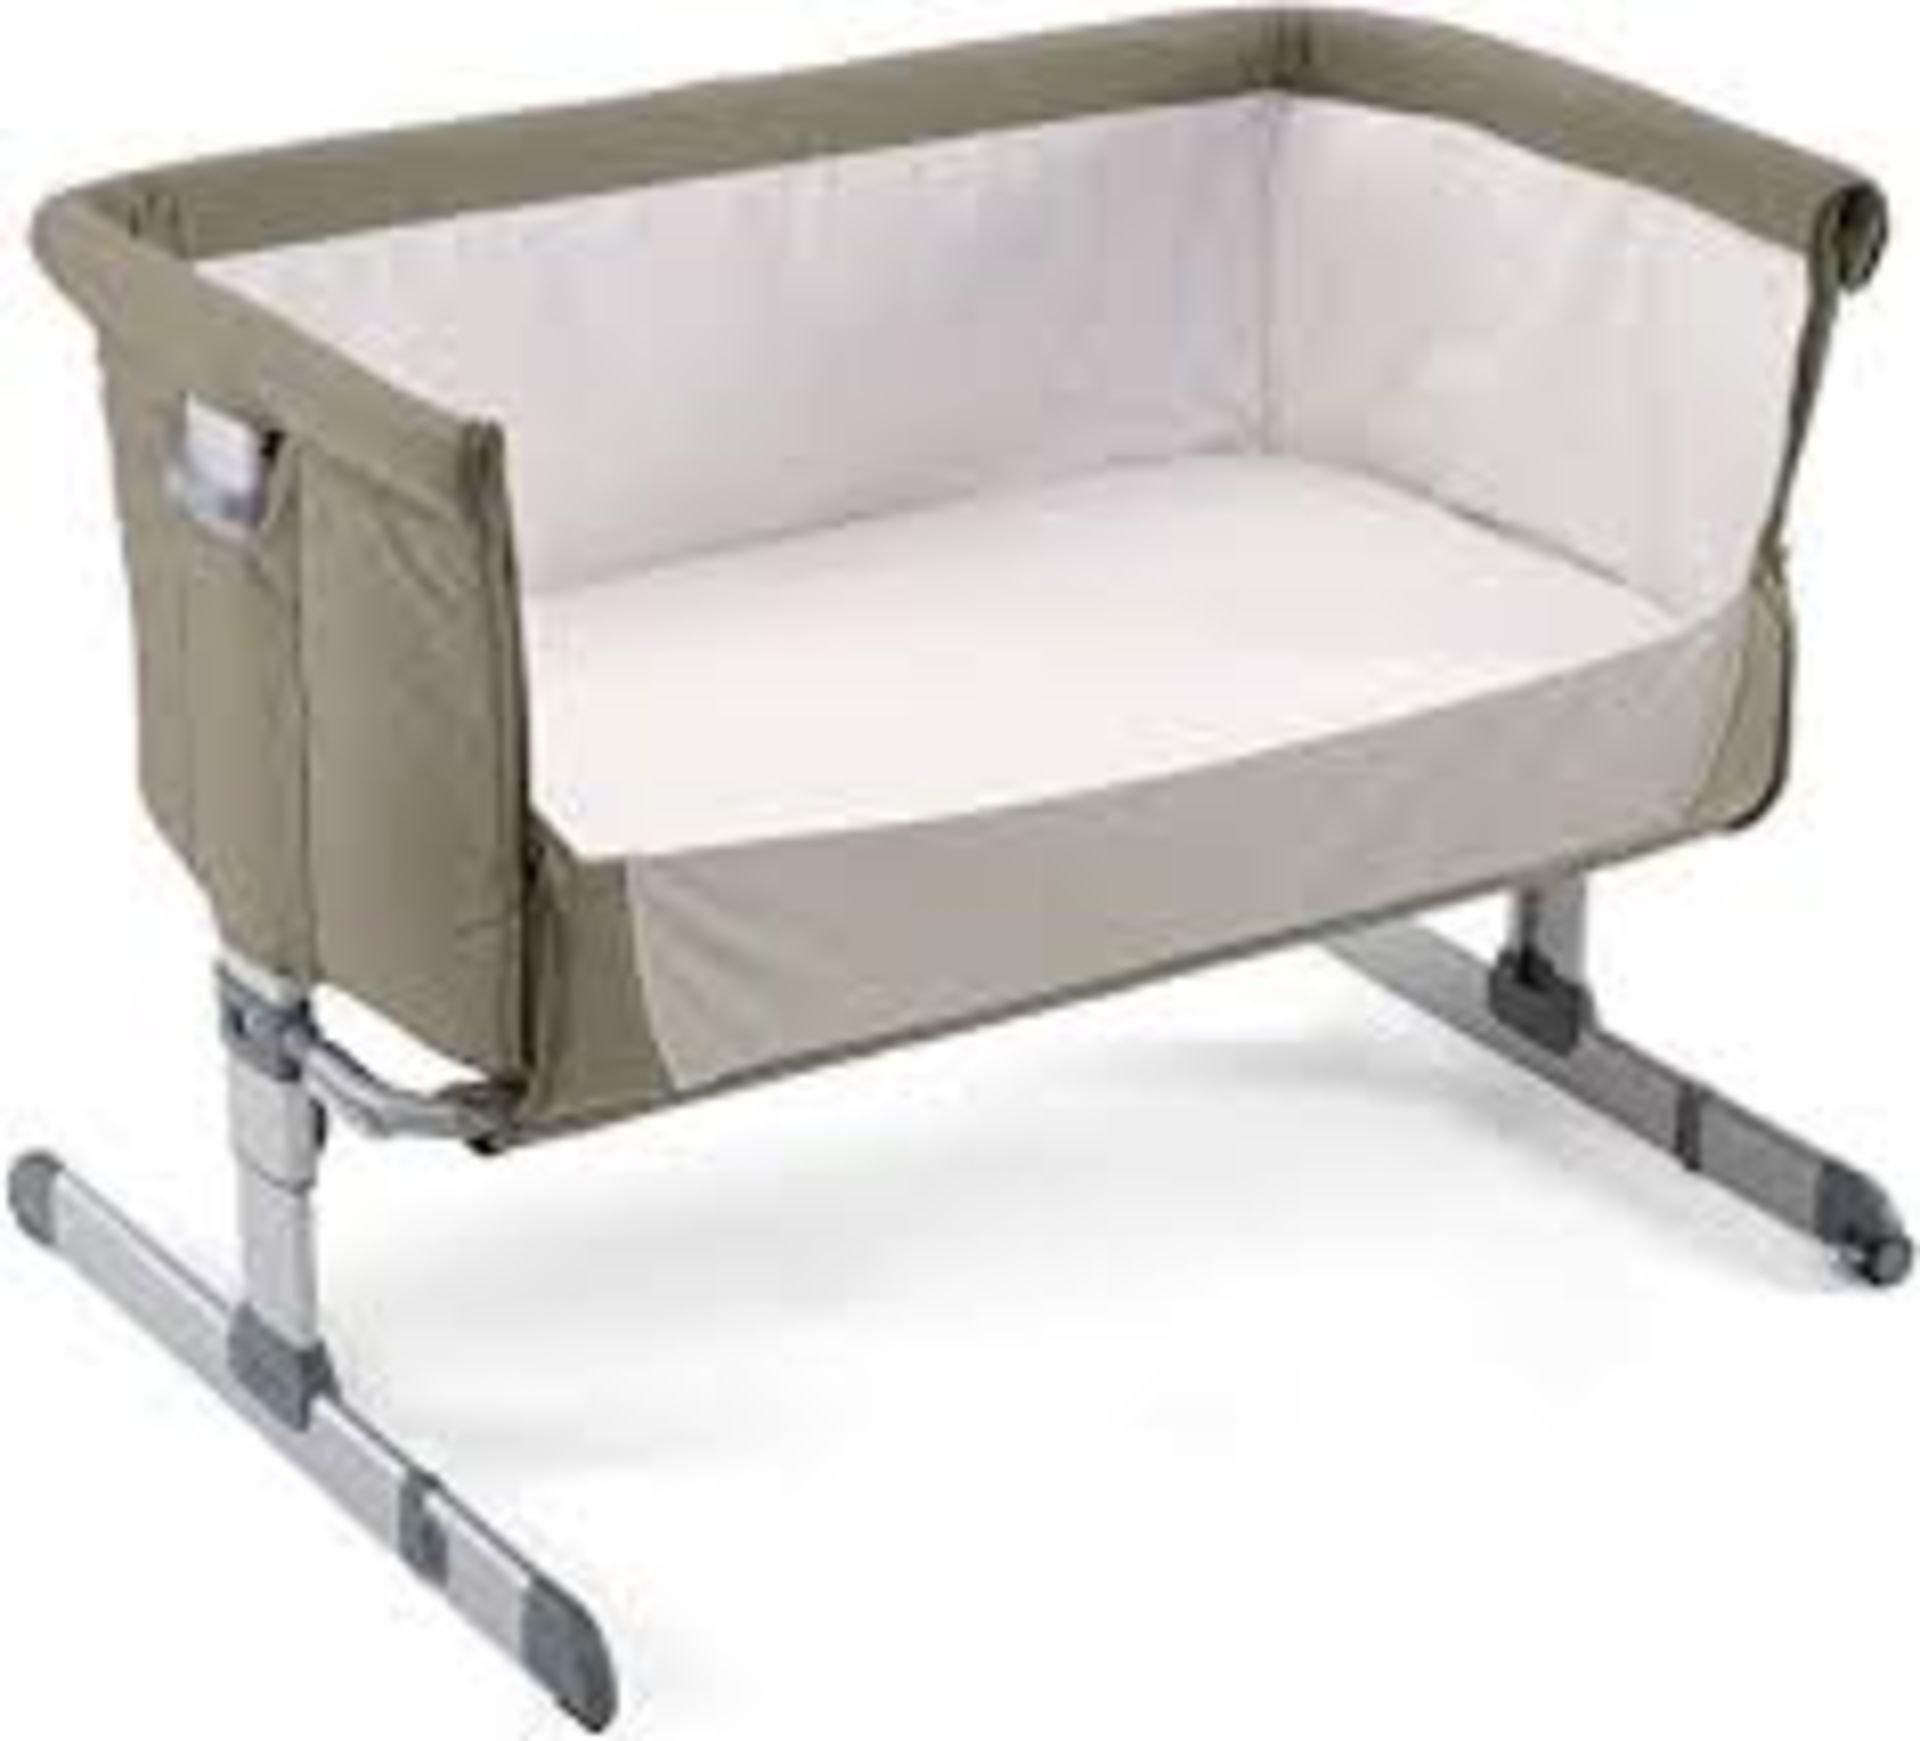 Chicco Next to Me Original Bedside Crib, RRP£120 (4947212) (Public Viewings And Appraisals